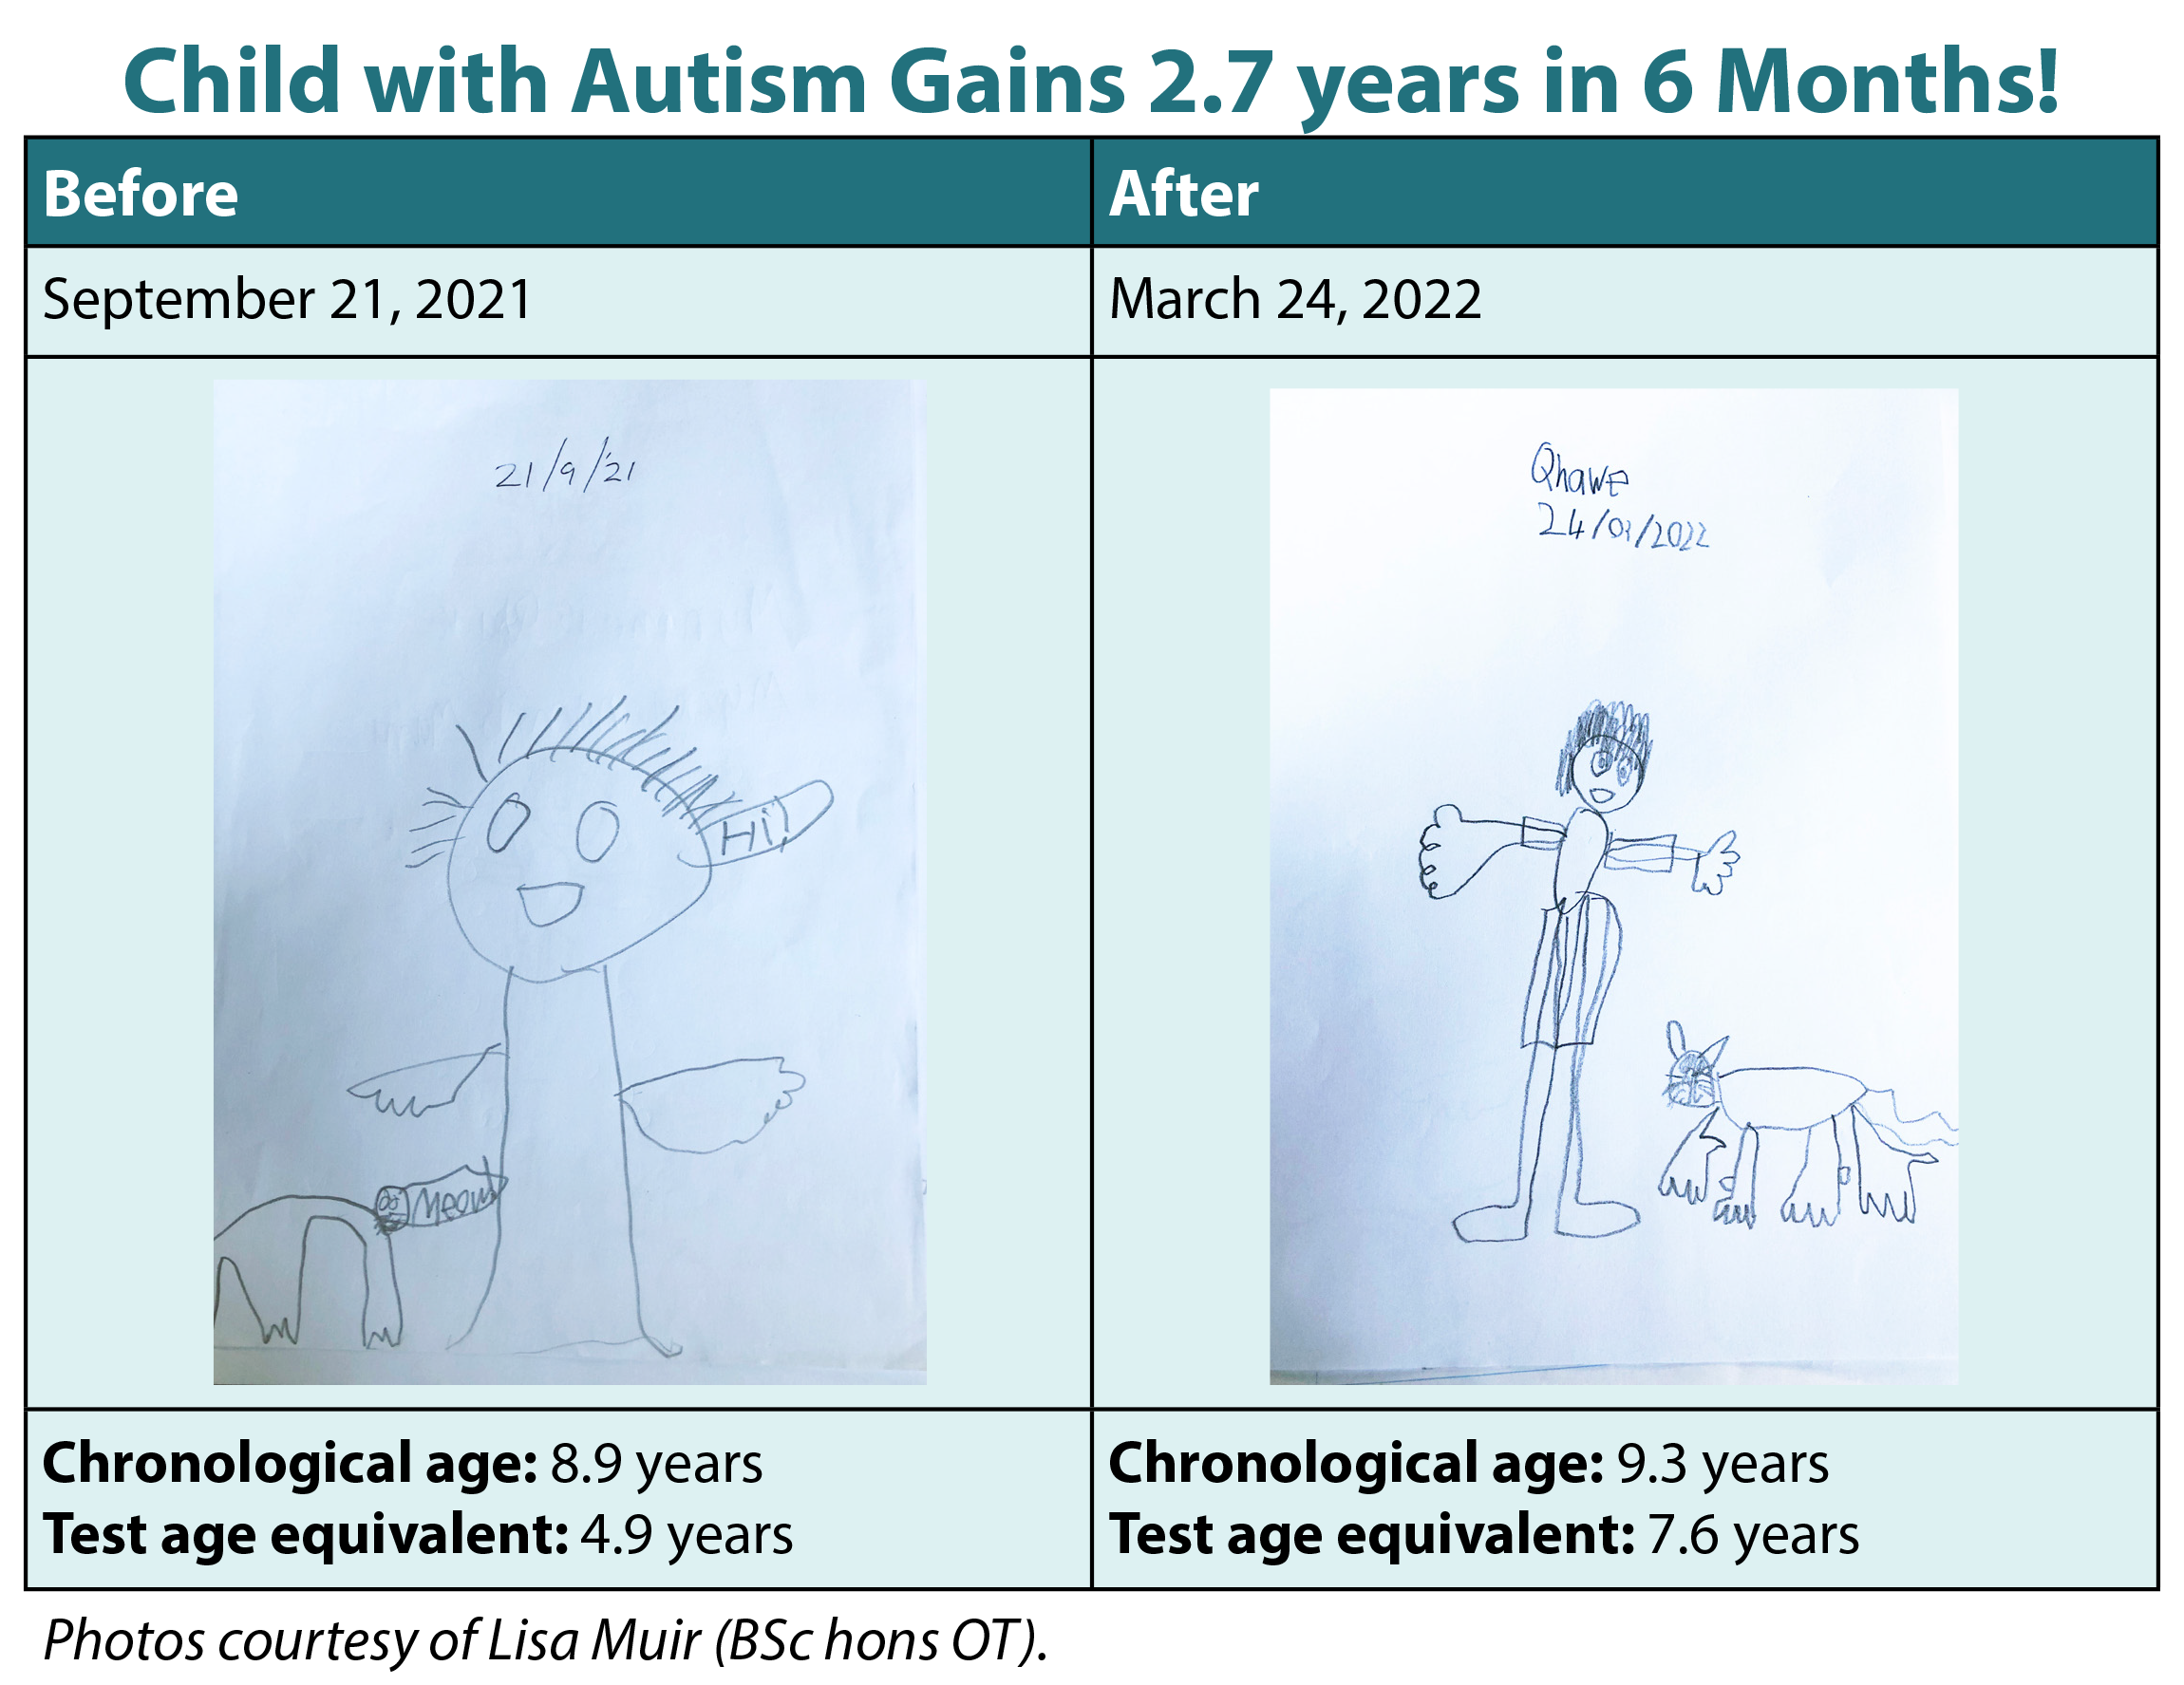 Improved Selective Mutism, Social, and Drawing